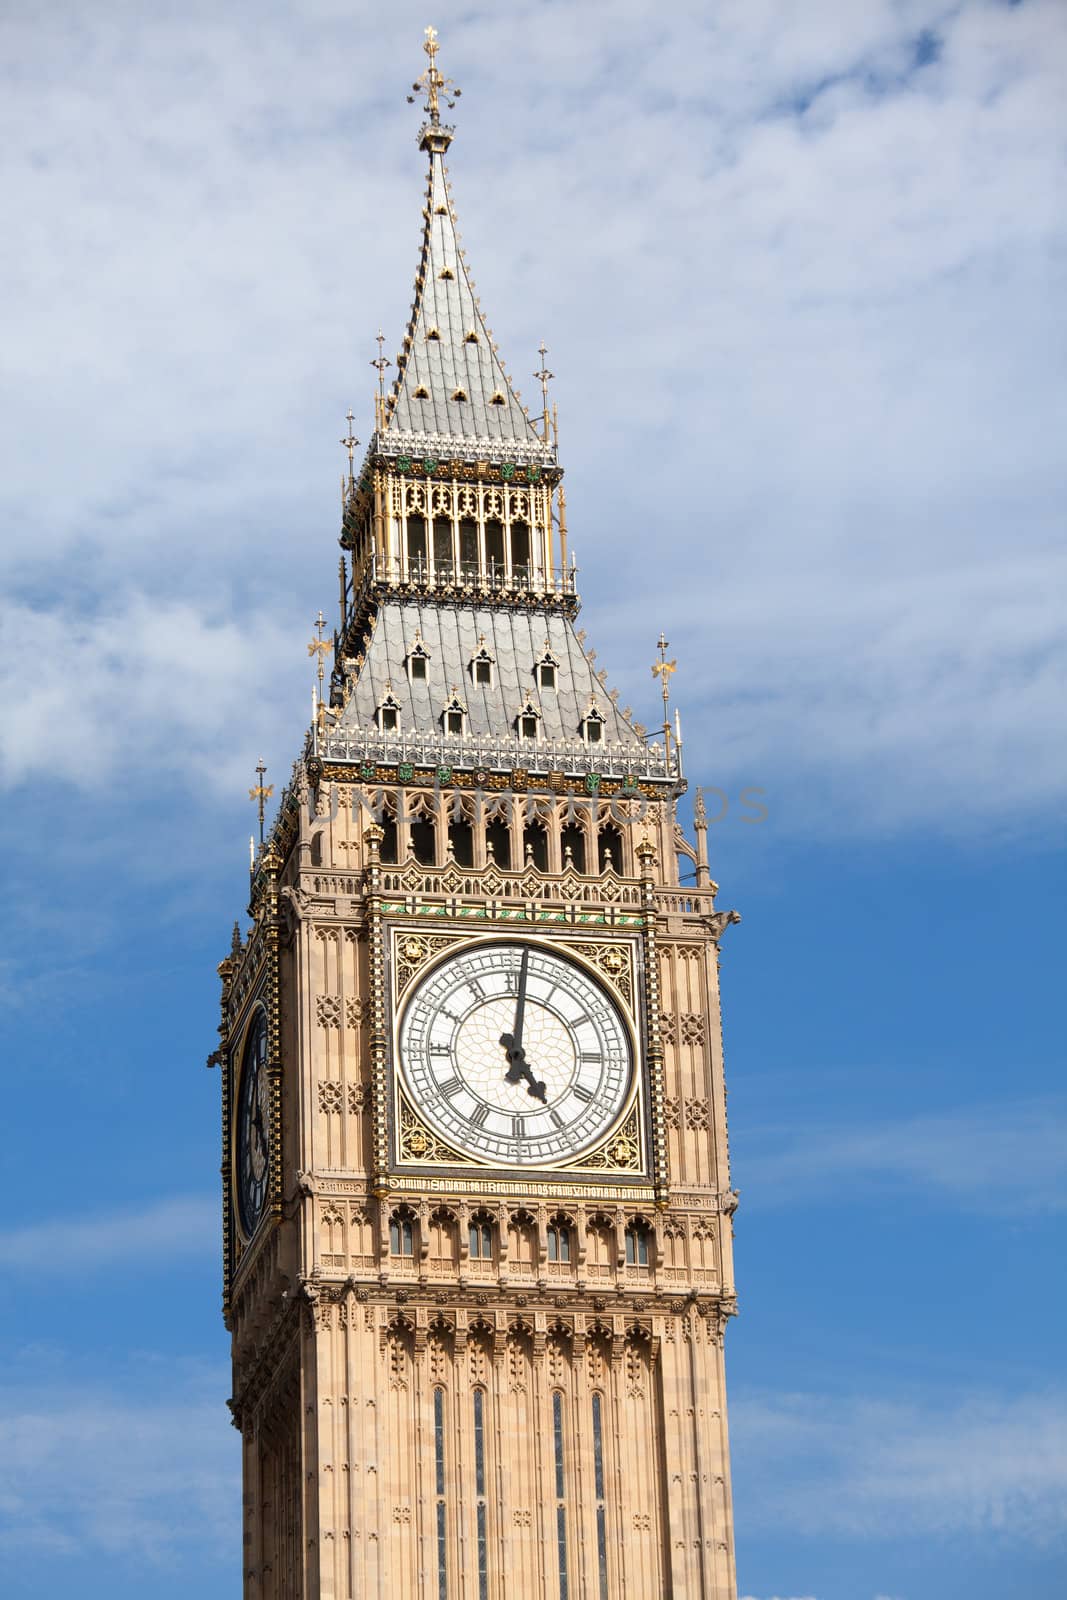 Britain national symbol Clock Big Ben (Elizabeth tower in Gothic Revival style) at 5 o’clock on cloudy sky background in London